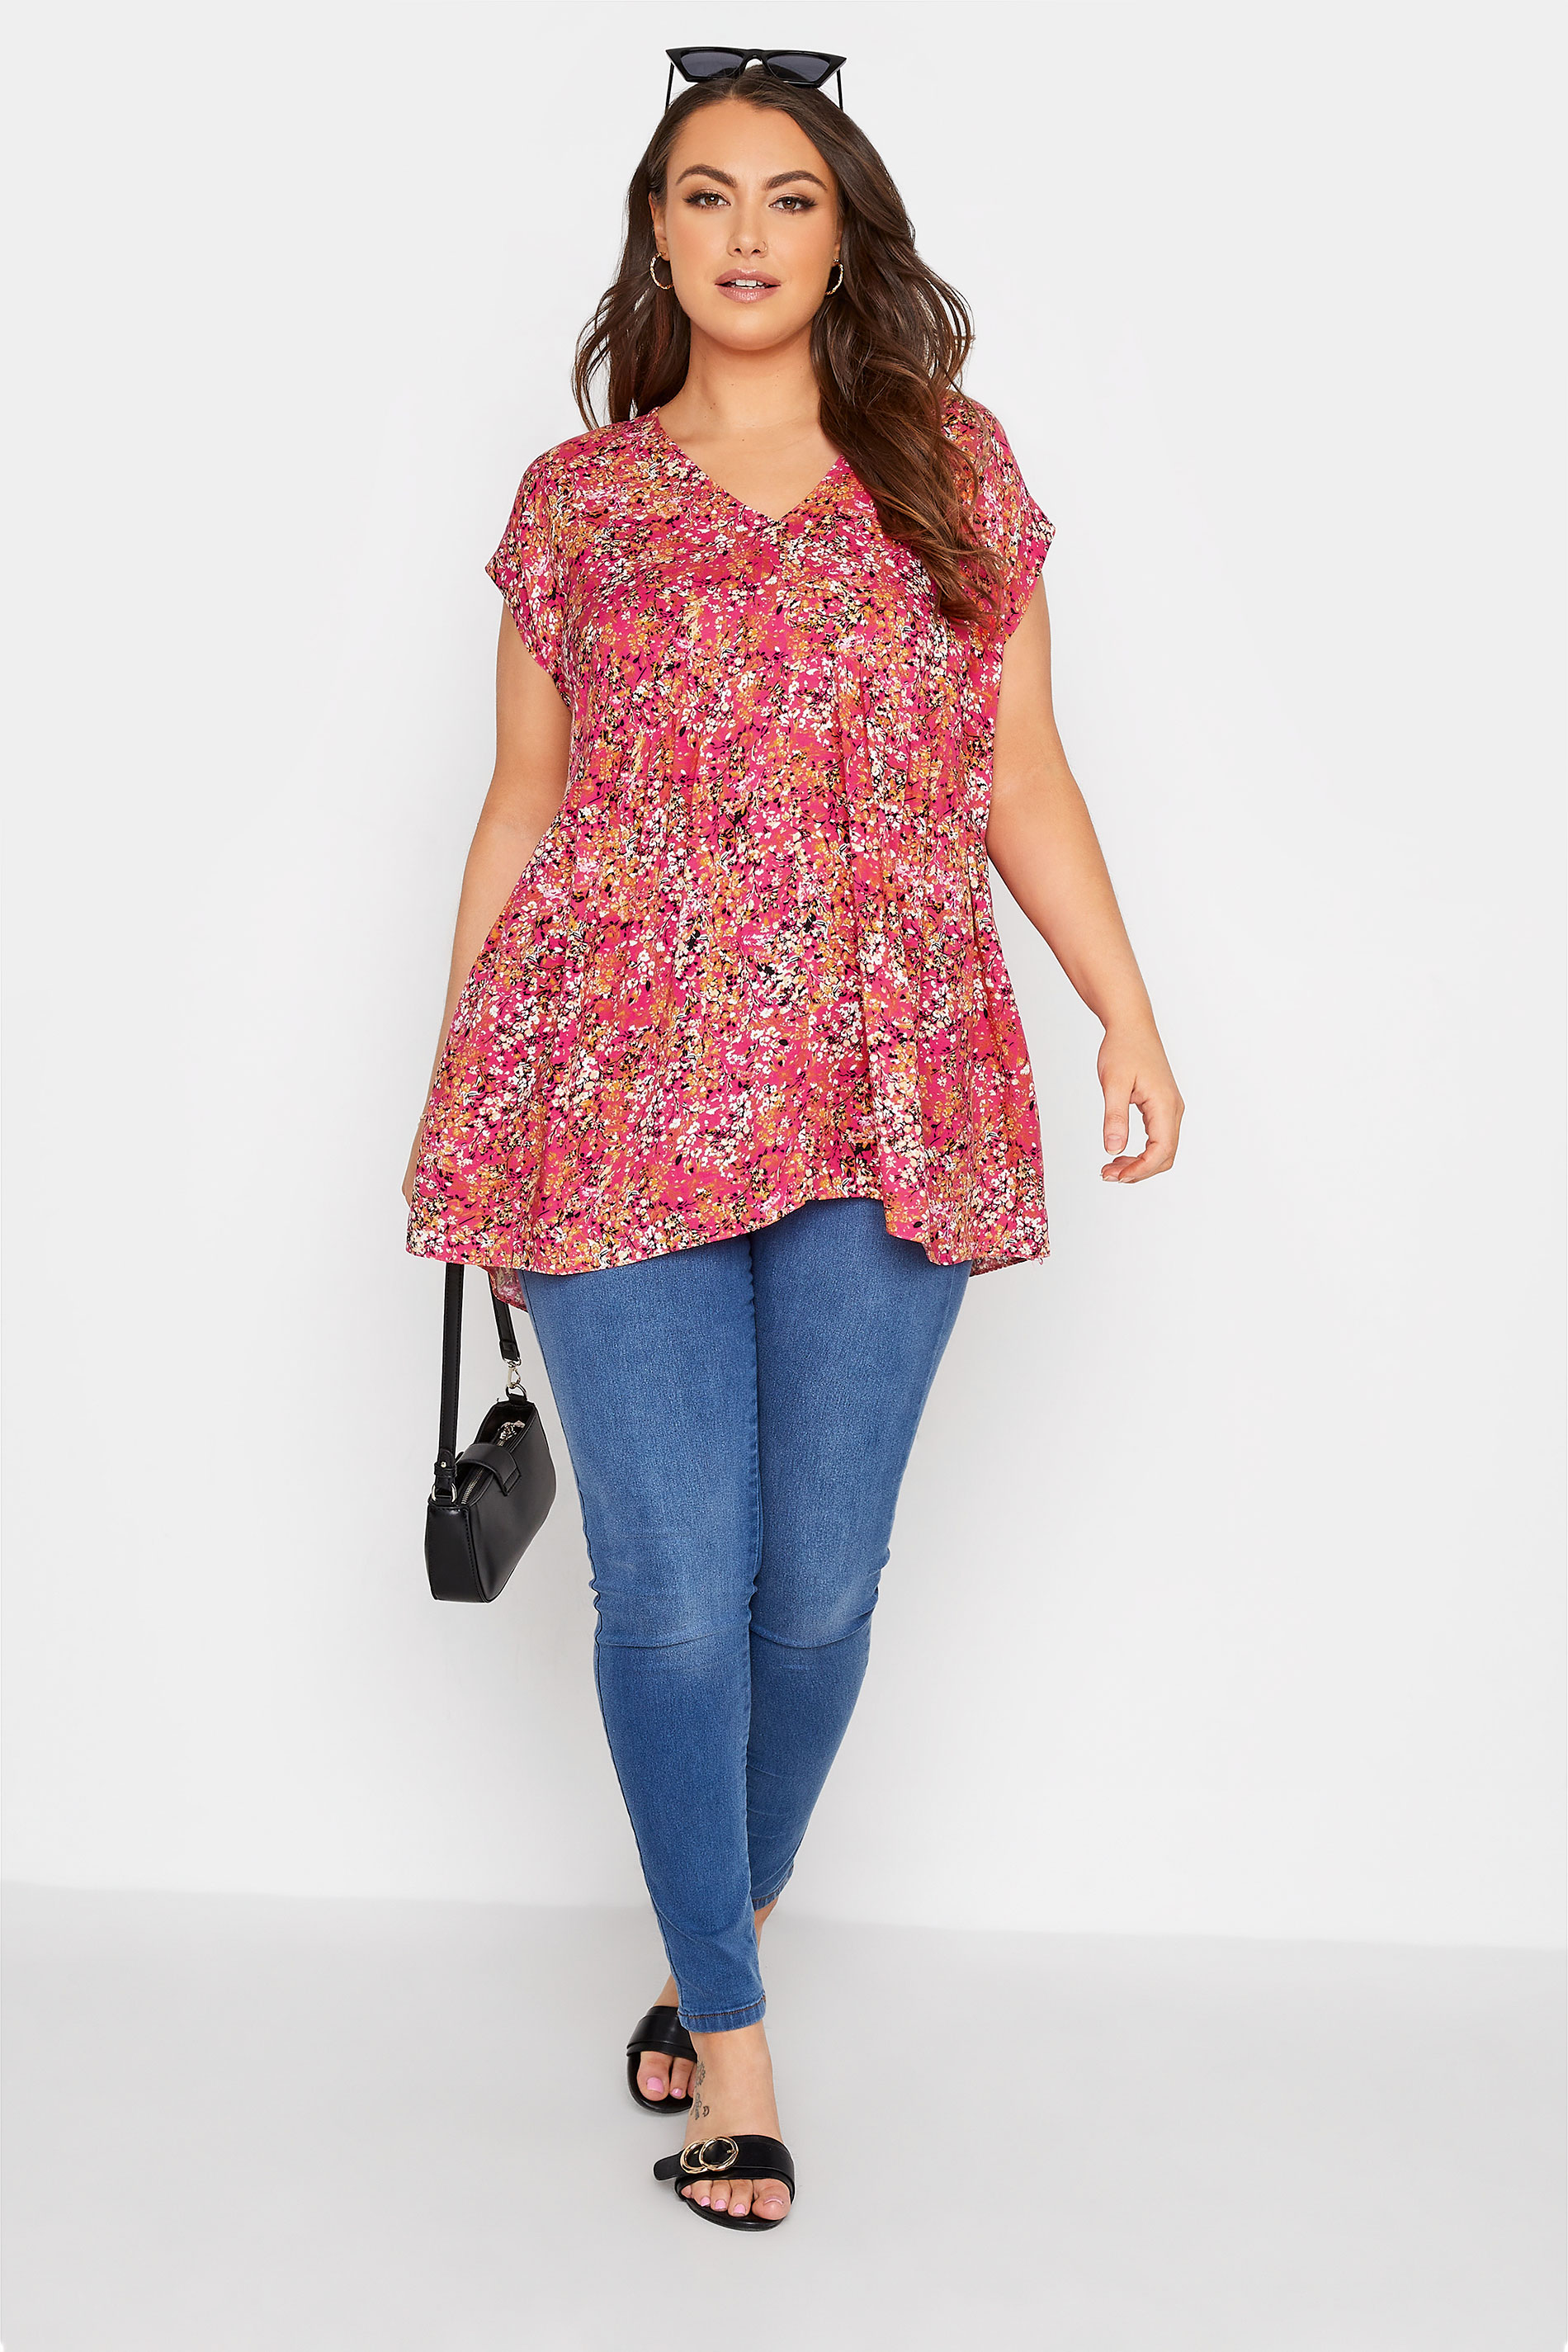 Grande taille  Tops Grande taille  Tops Ourlet Plongeant | YOURS LONDON - Tunique Rose Floral Ourlet Plongeant - MB88964